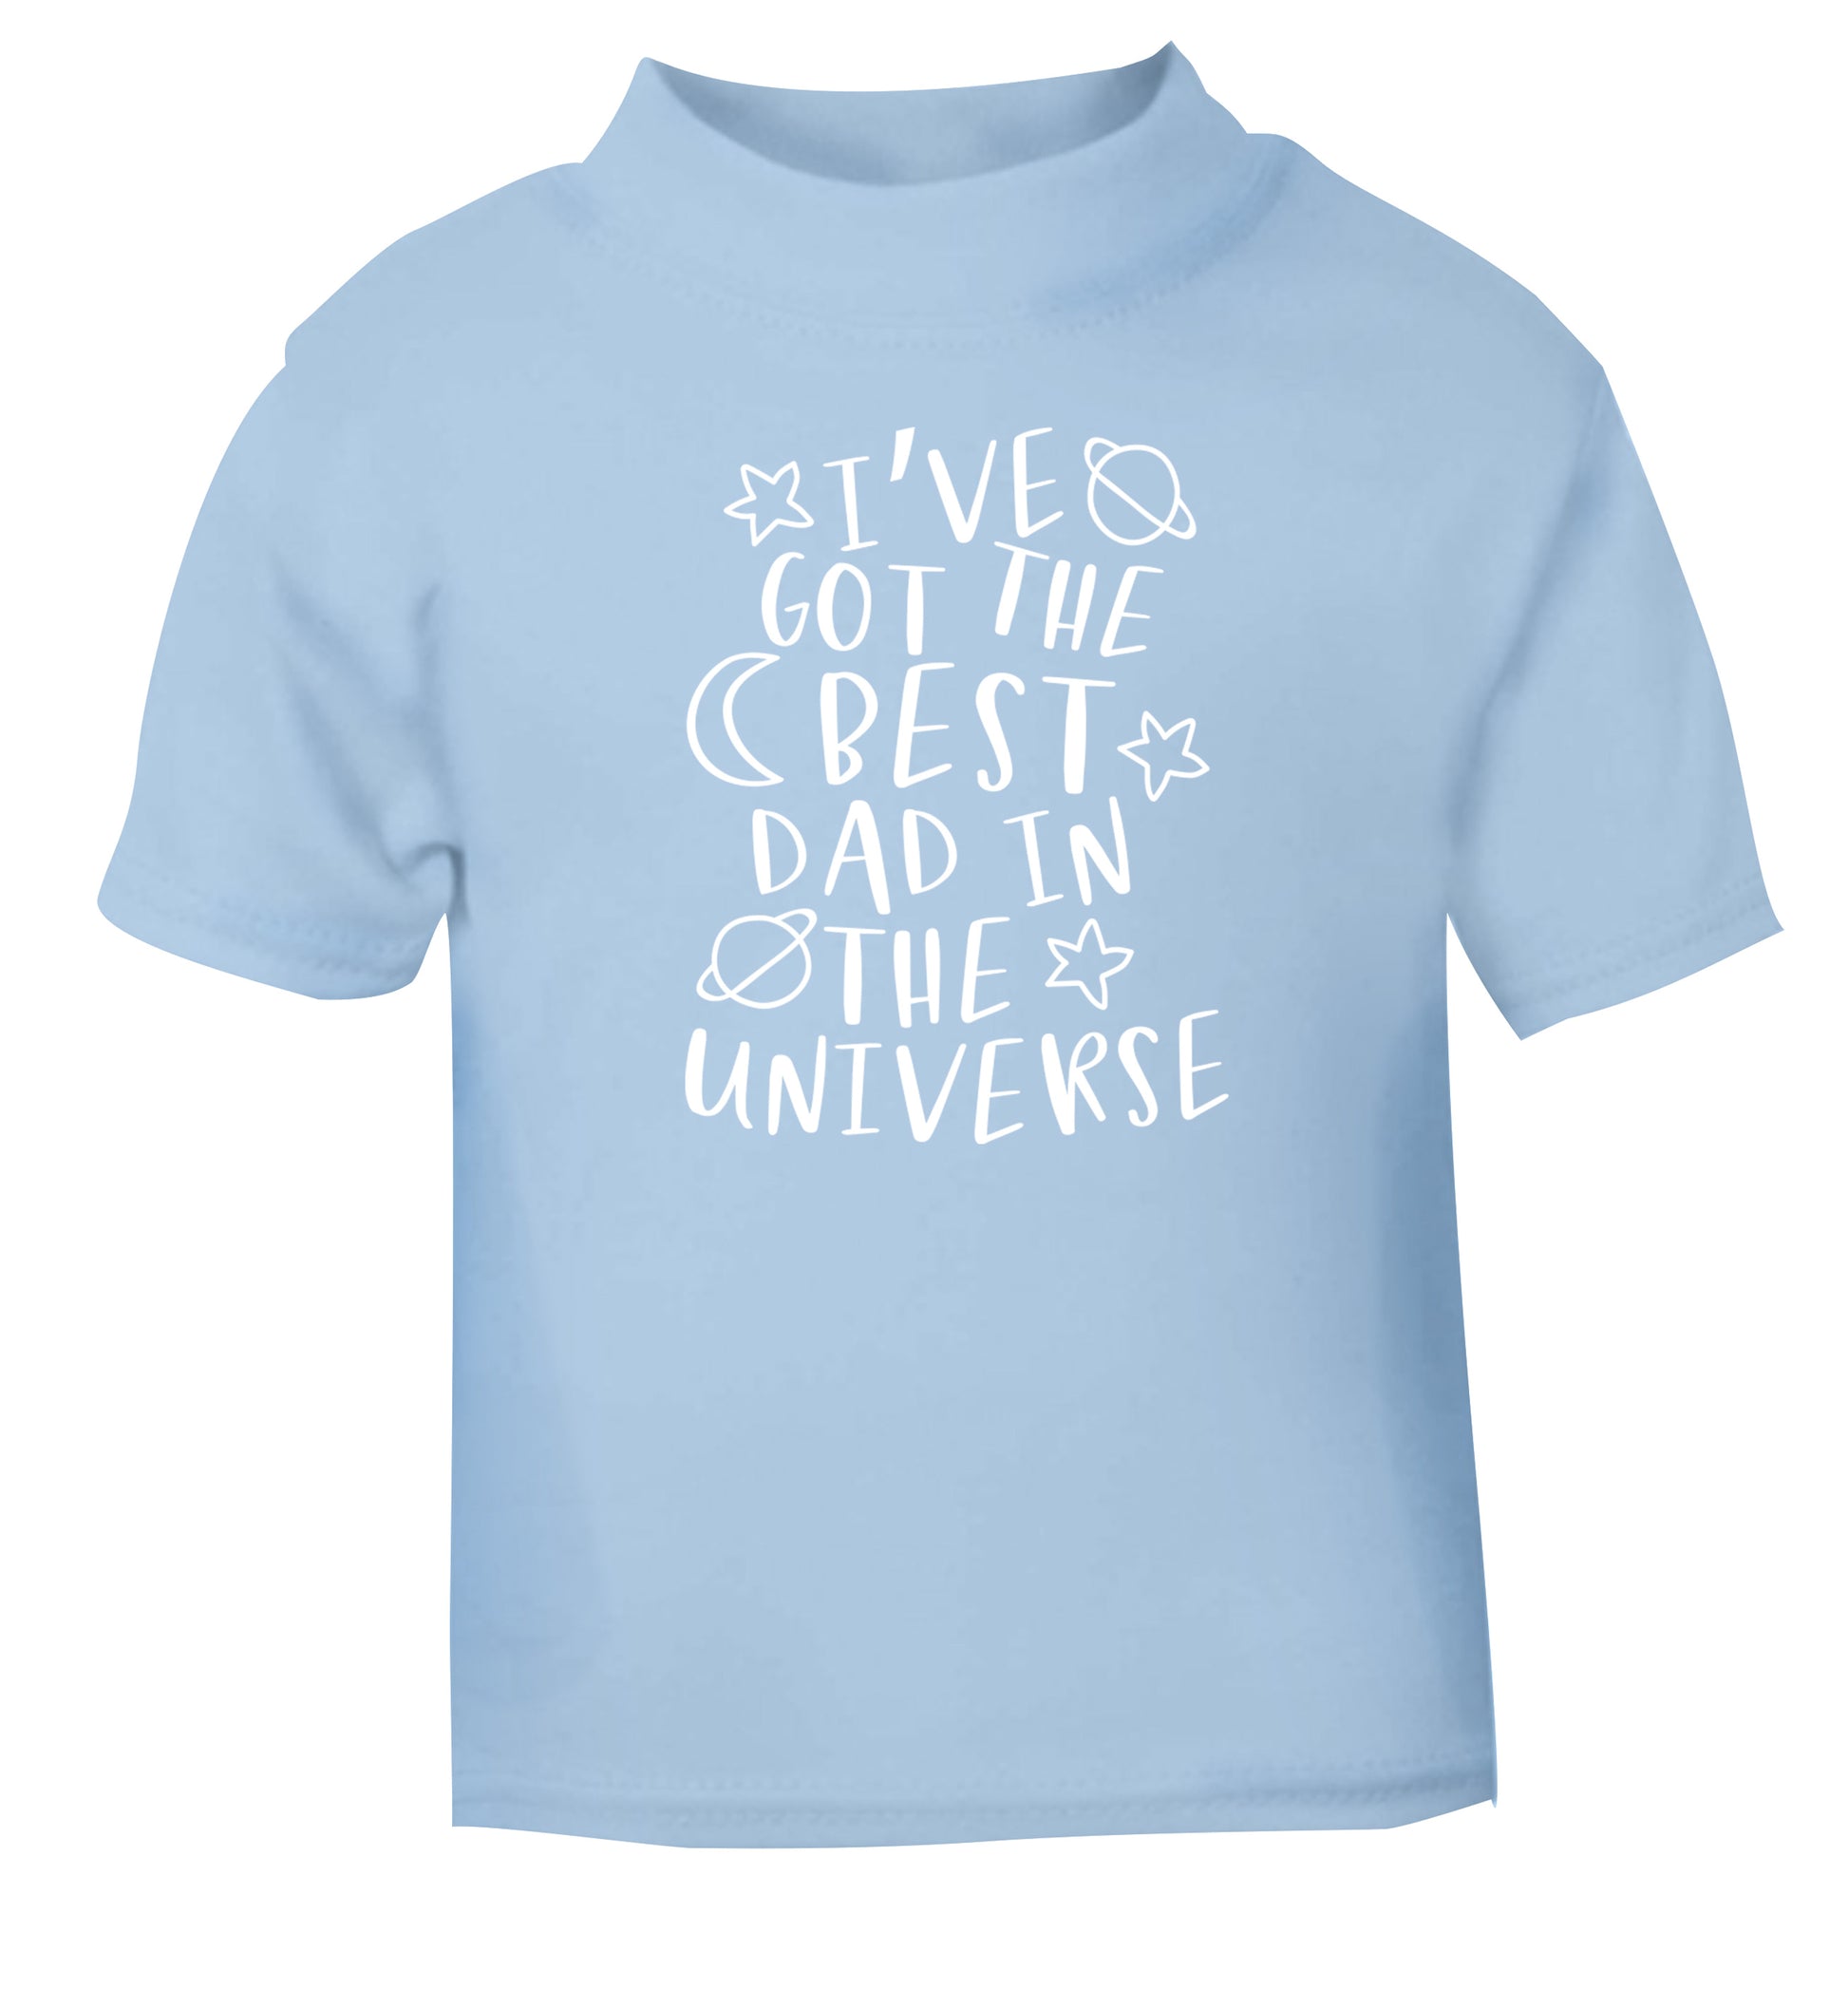 I've got the best dad in the universe light blue Baby Toddler Tshirt 2 Years